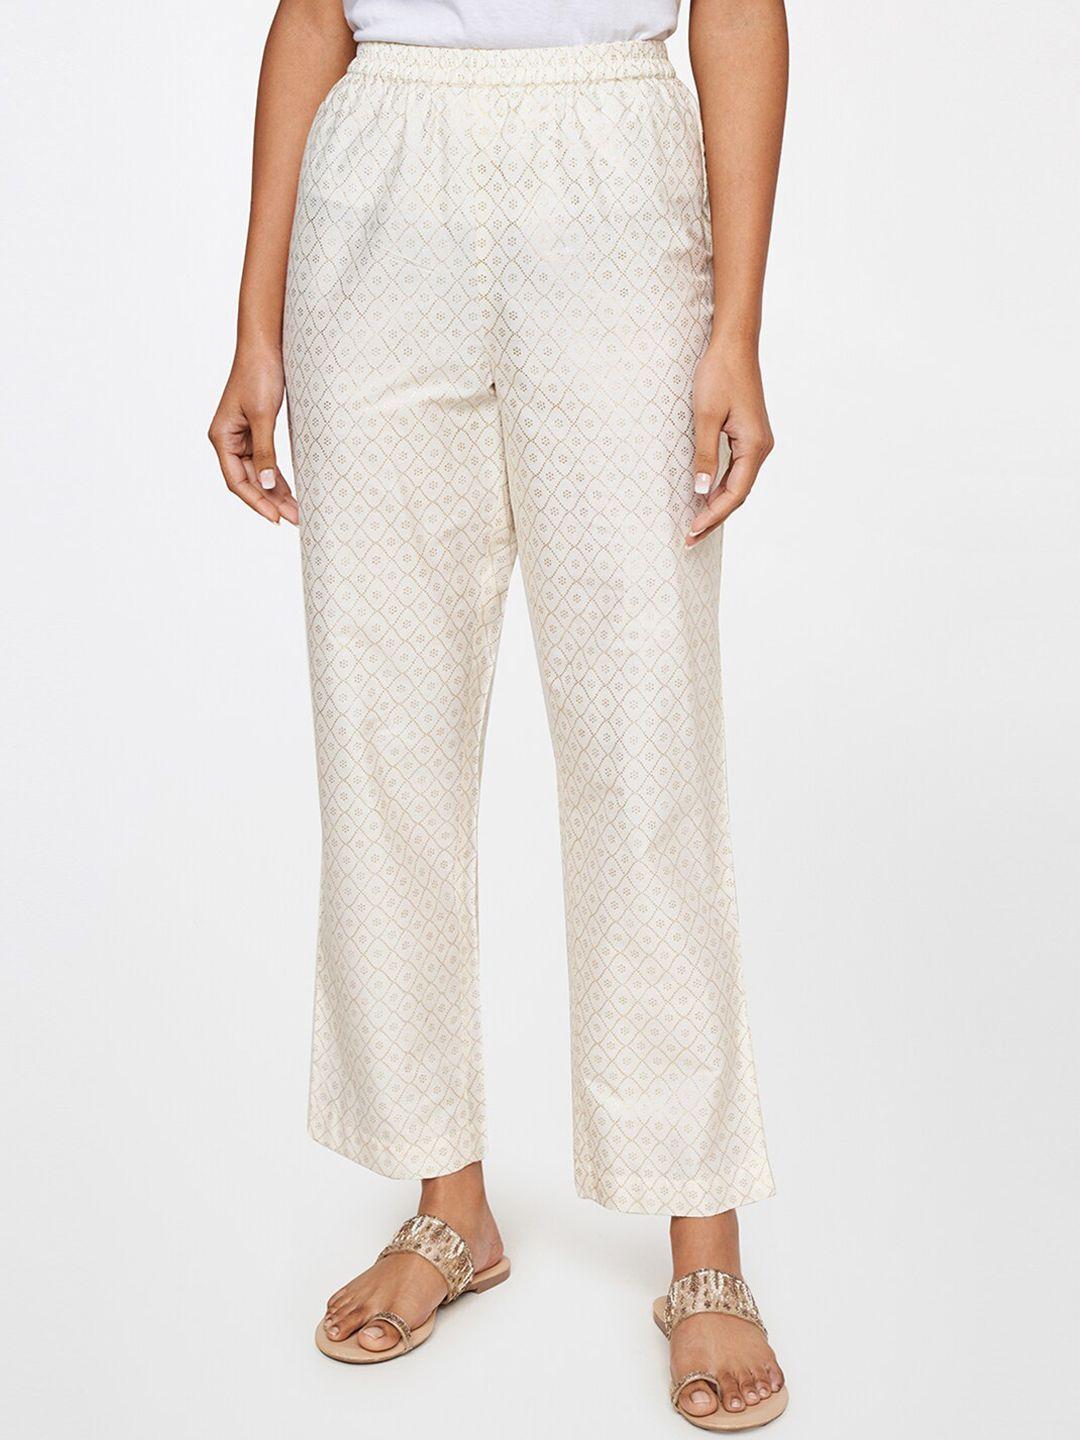 itse-women-white-printed-textured-slip-on-trousers